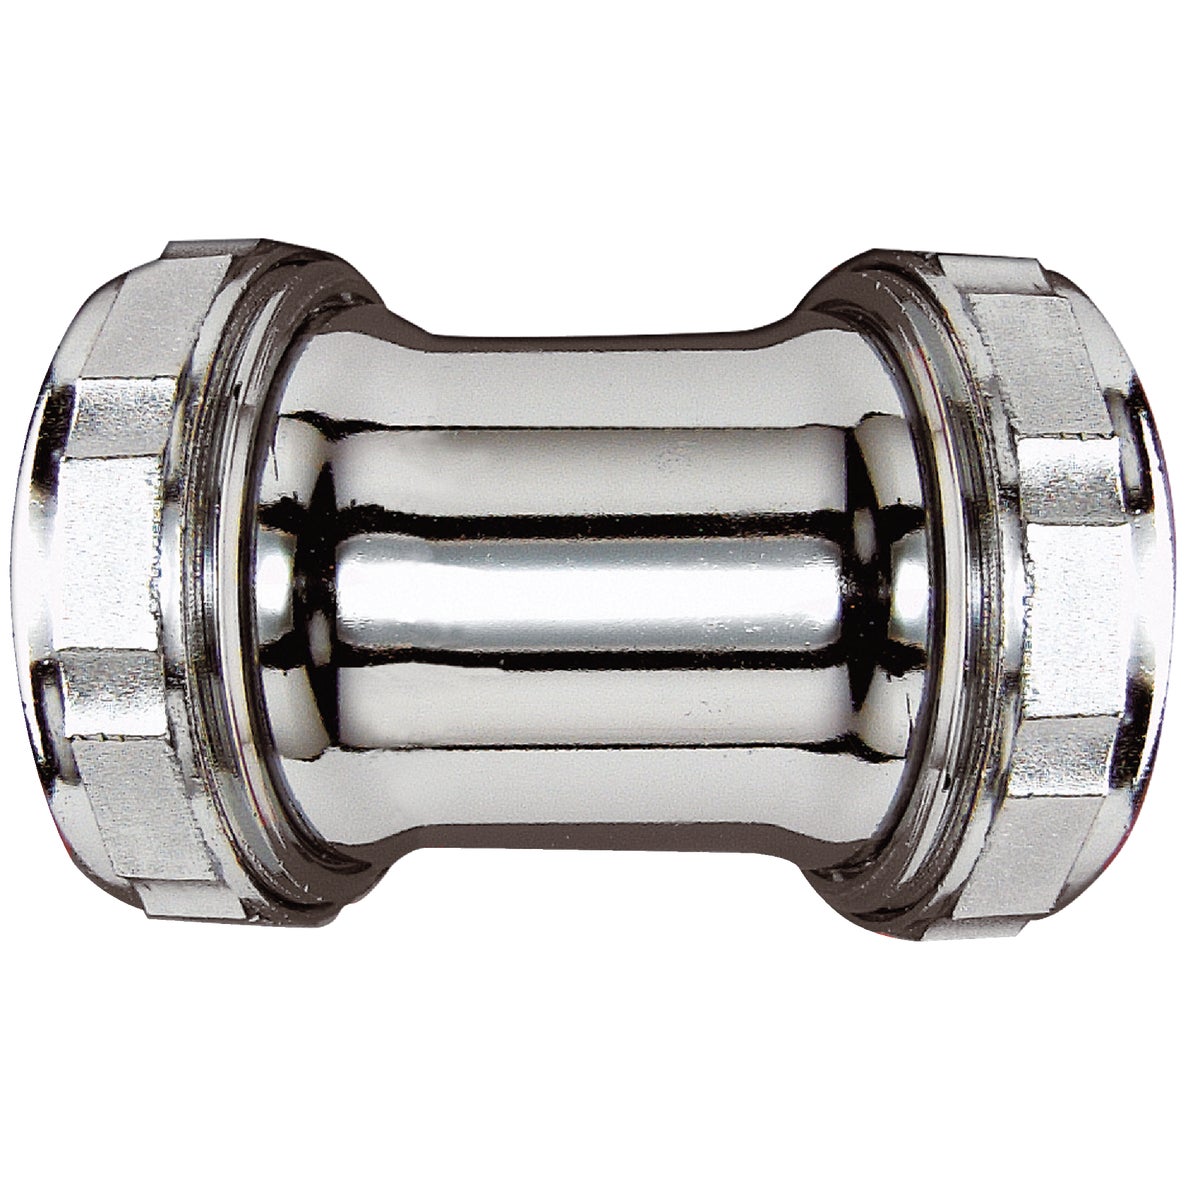 Item 404075, Double slip straight repair coupling with zinc nuts and plastic washers.